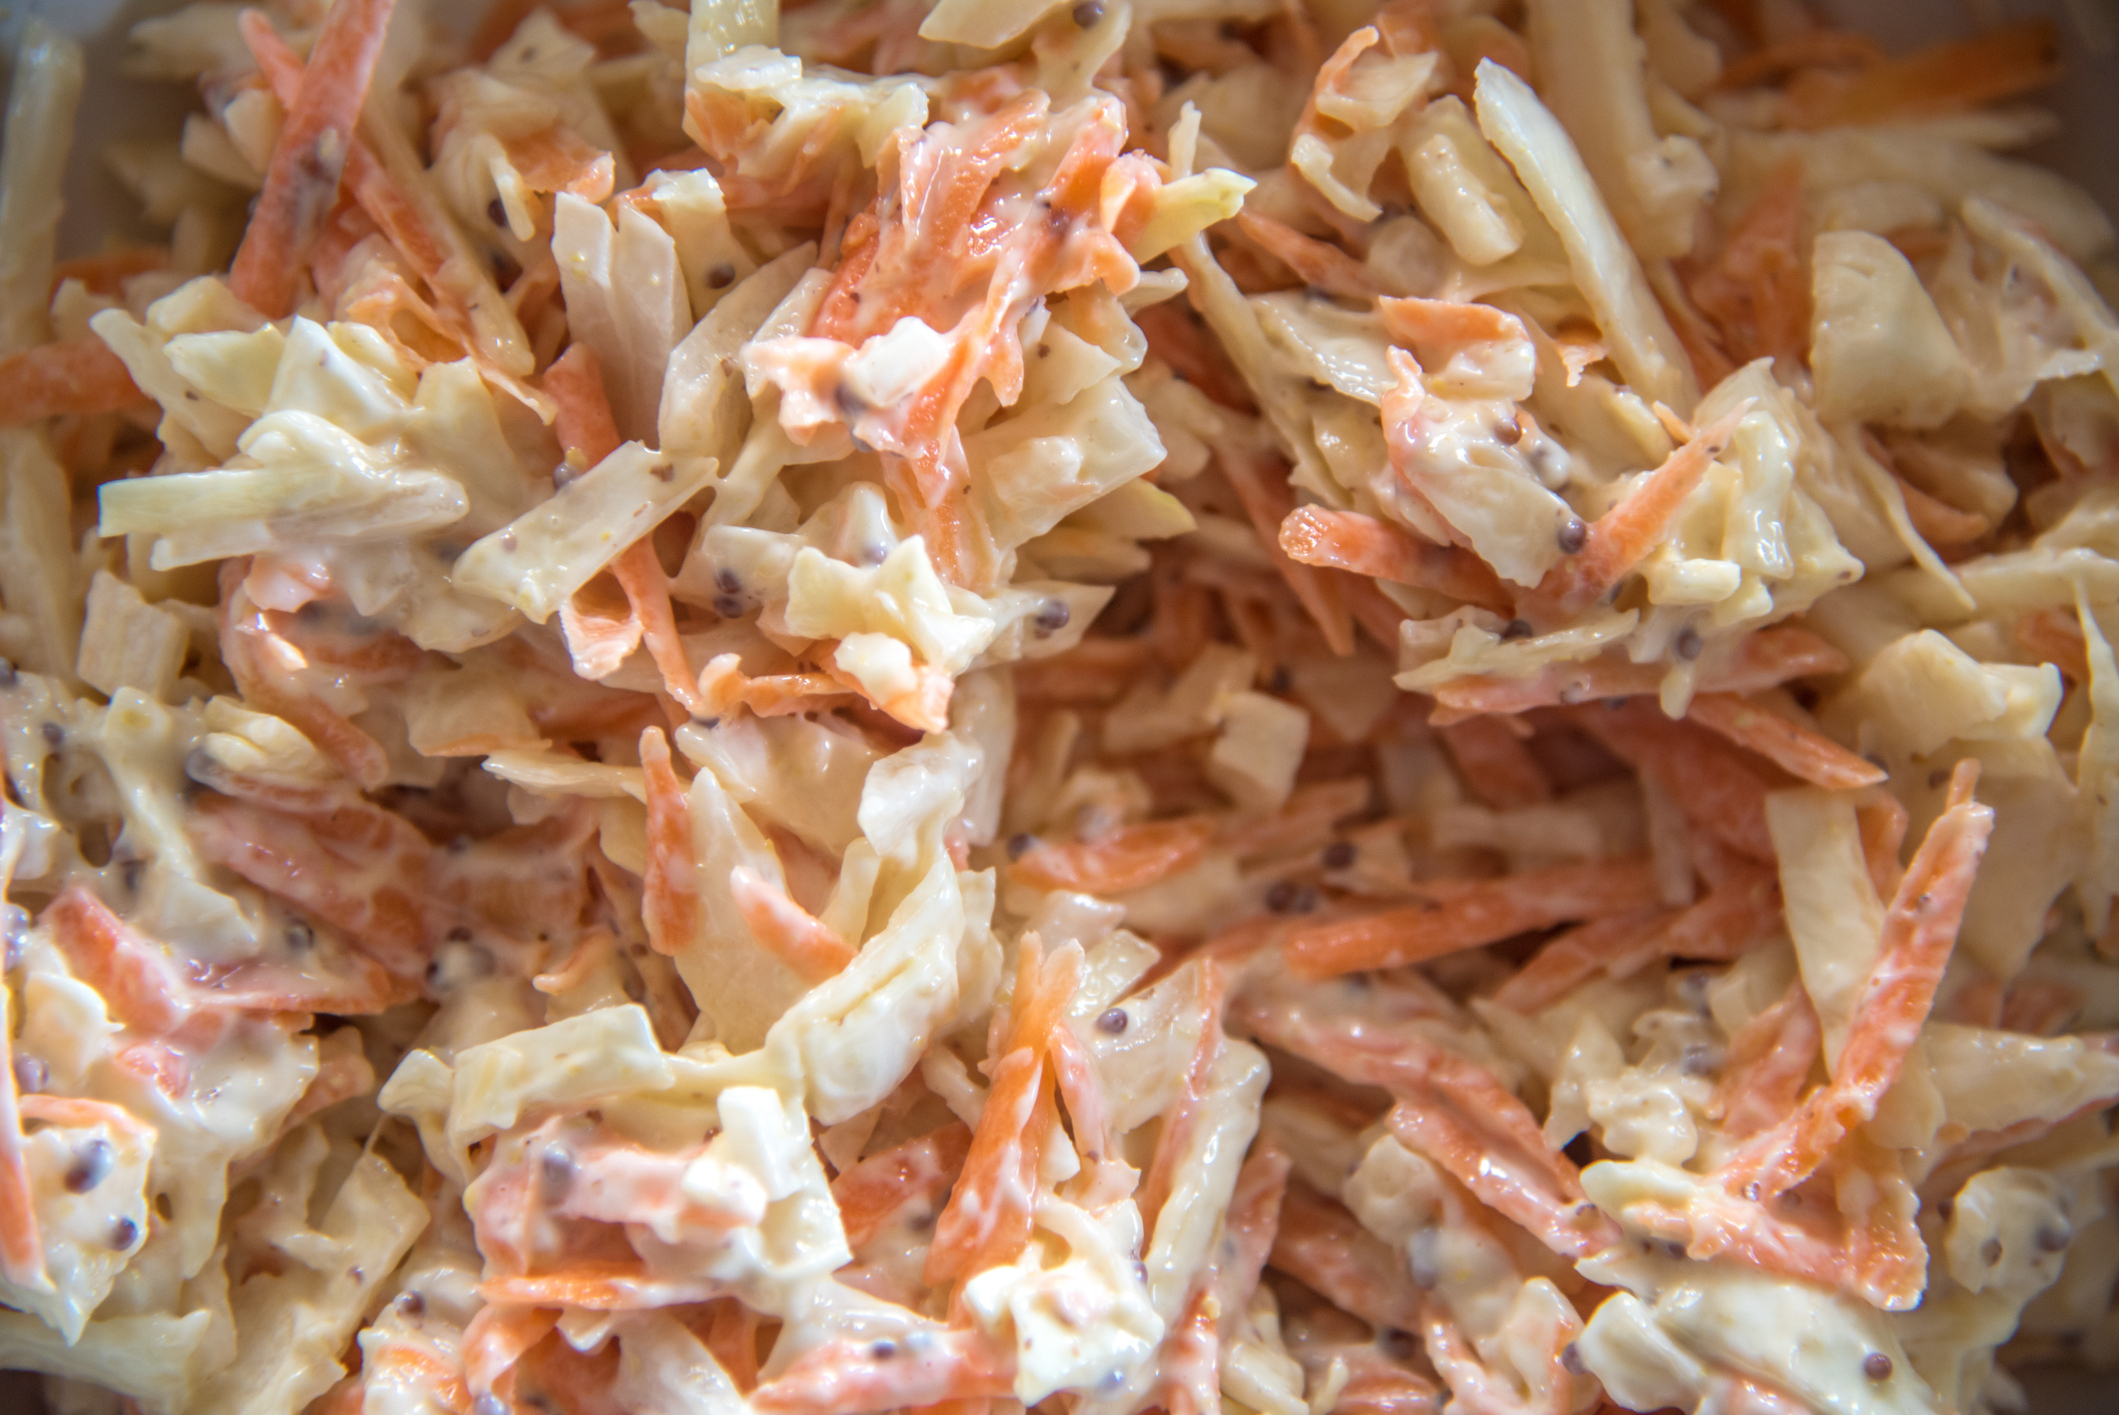 Close-up of coleslaw with shredded carrots and cabbage in creamy dressing